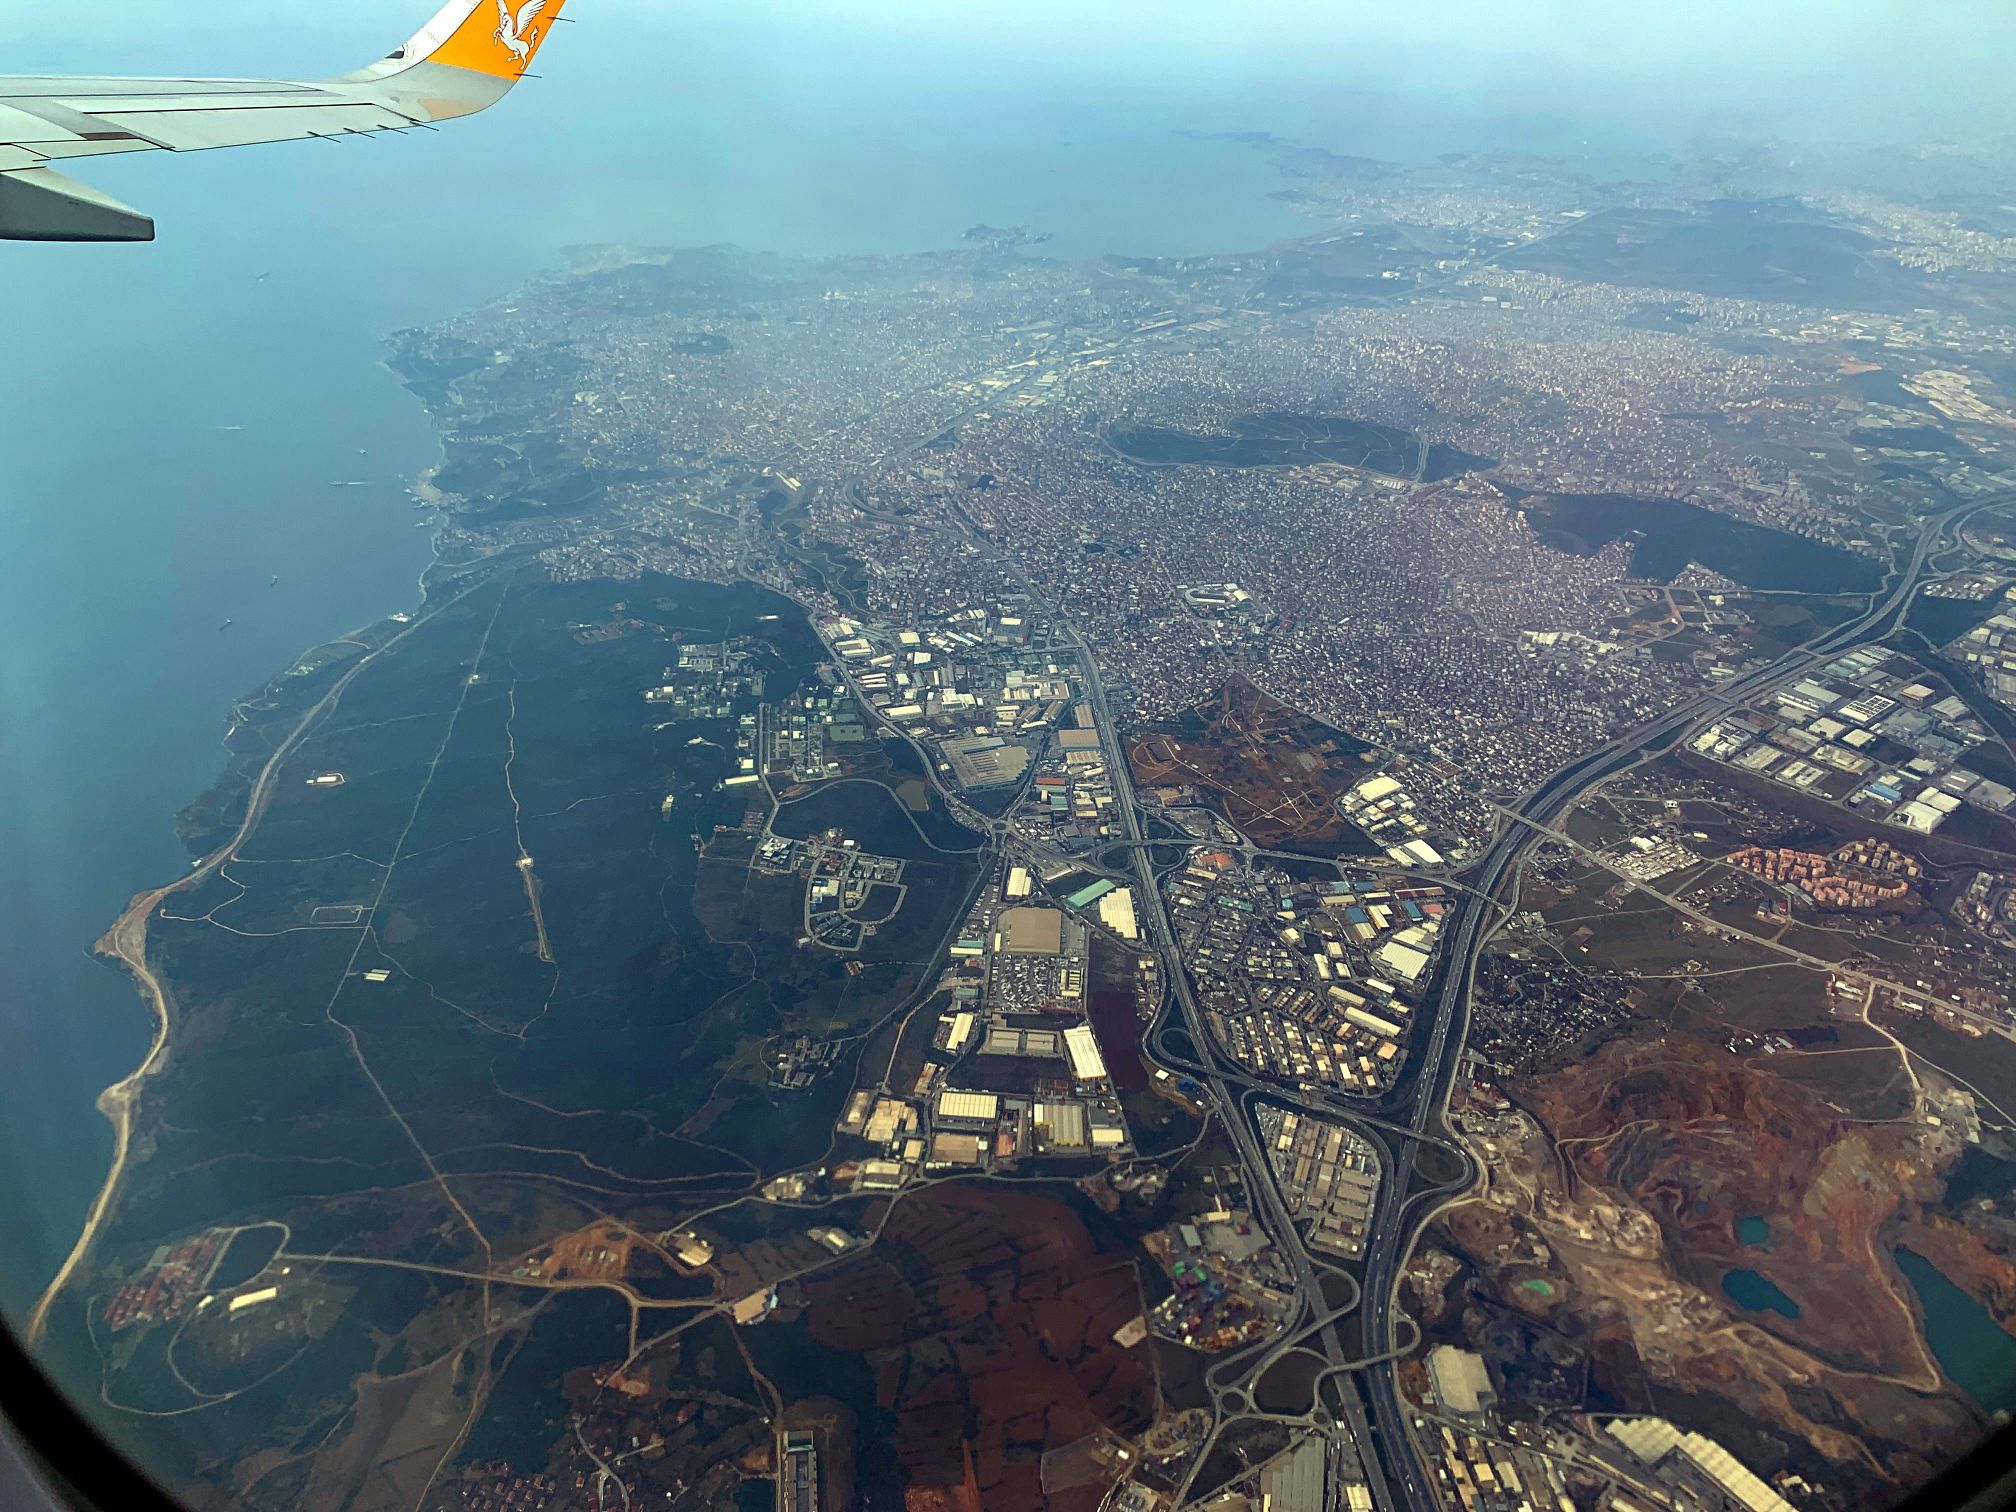 The city of Antalya as seen from the airplane